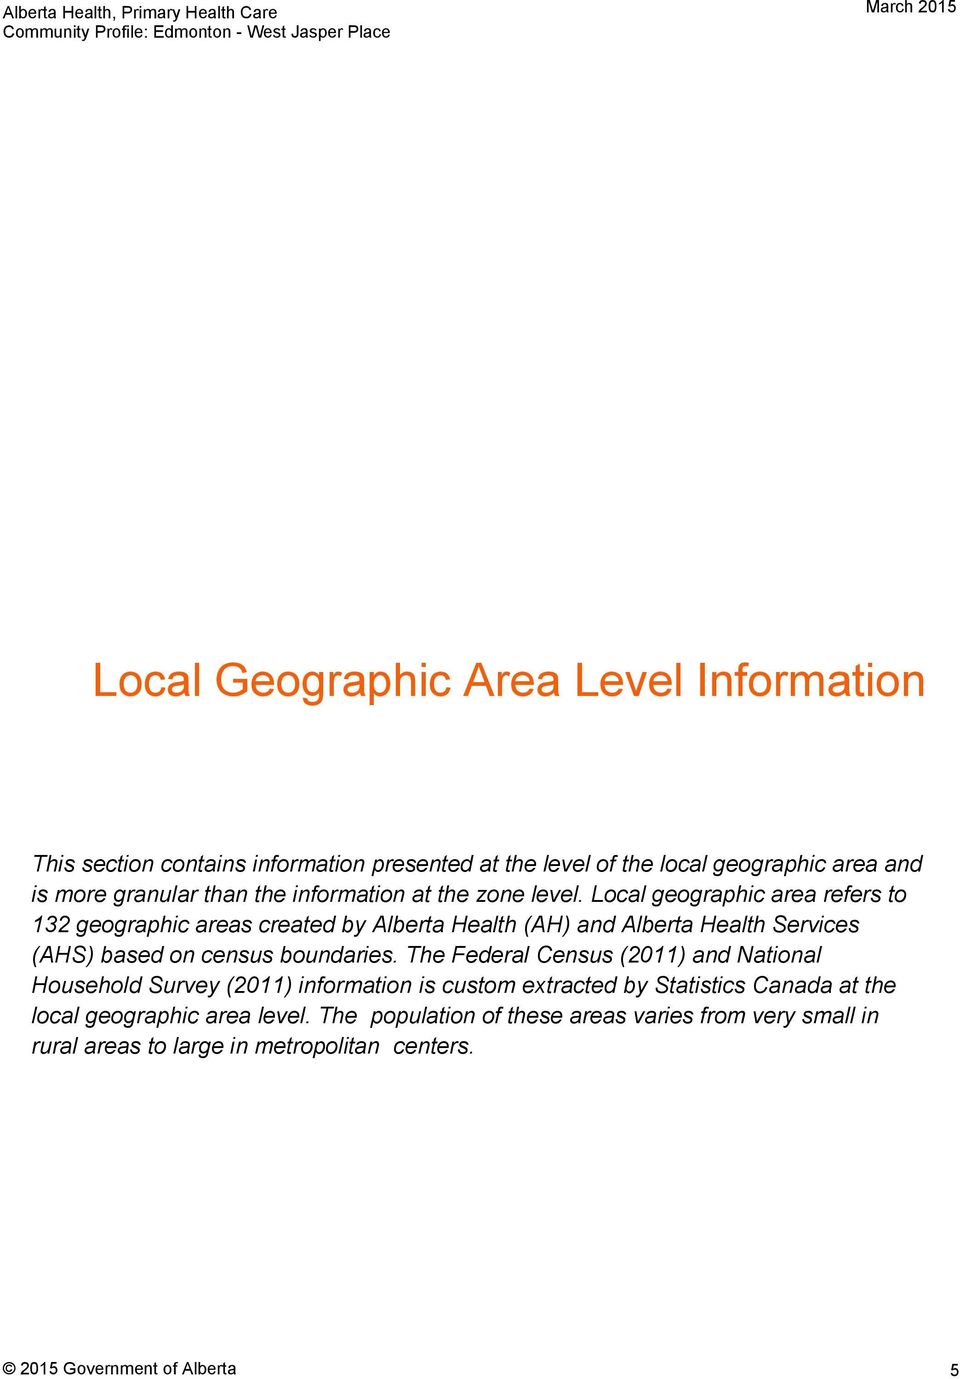 Local geographic area refers to 132 geographic areas created by Alberta Health (AH) and Alberta Health Services (AHS) based on census boundaries.